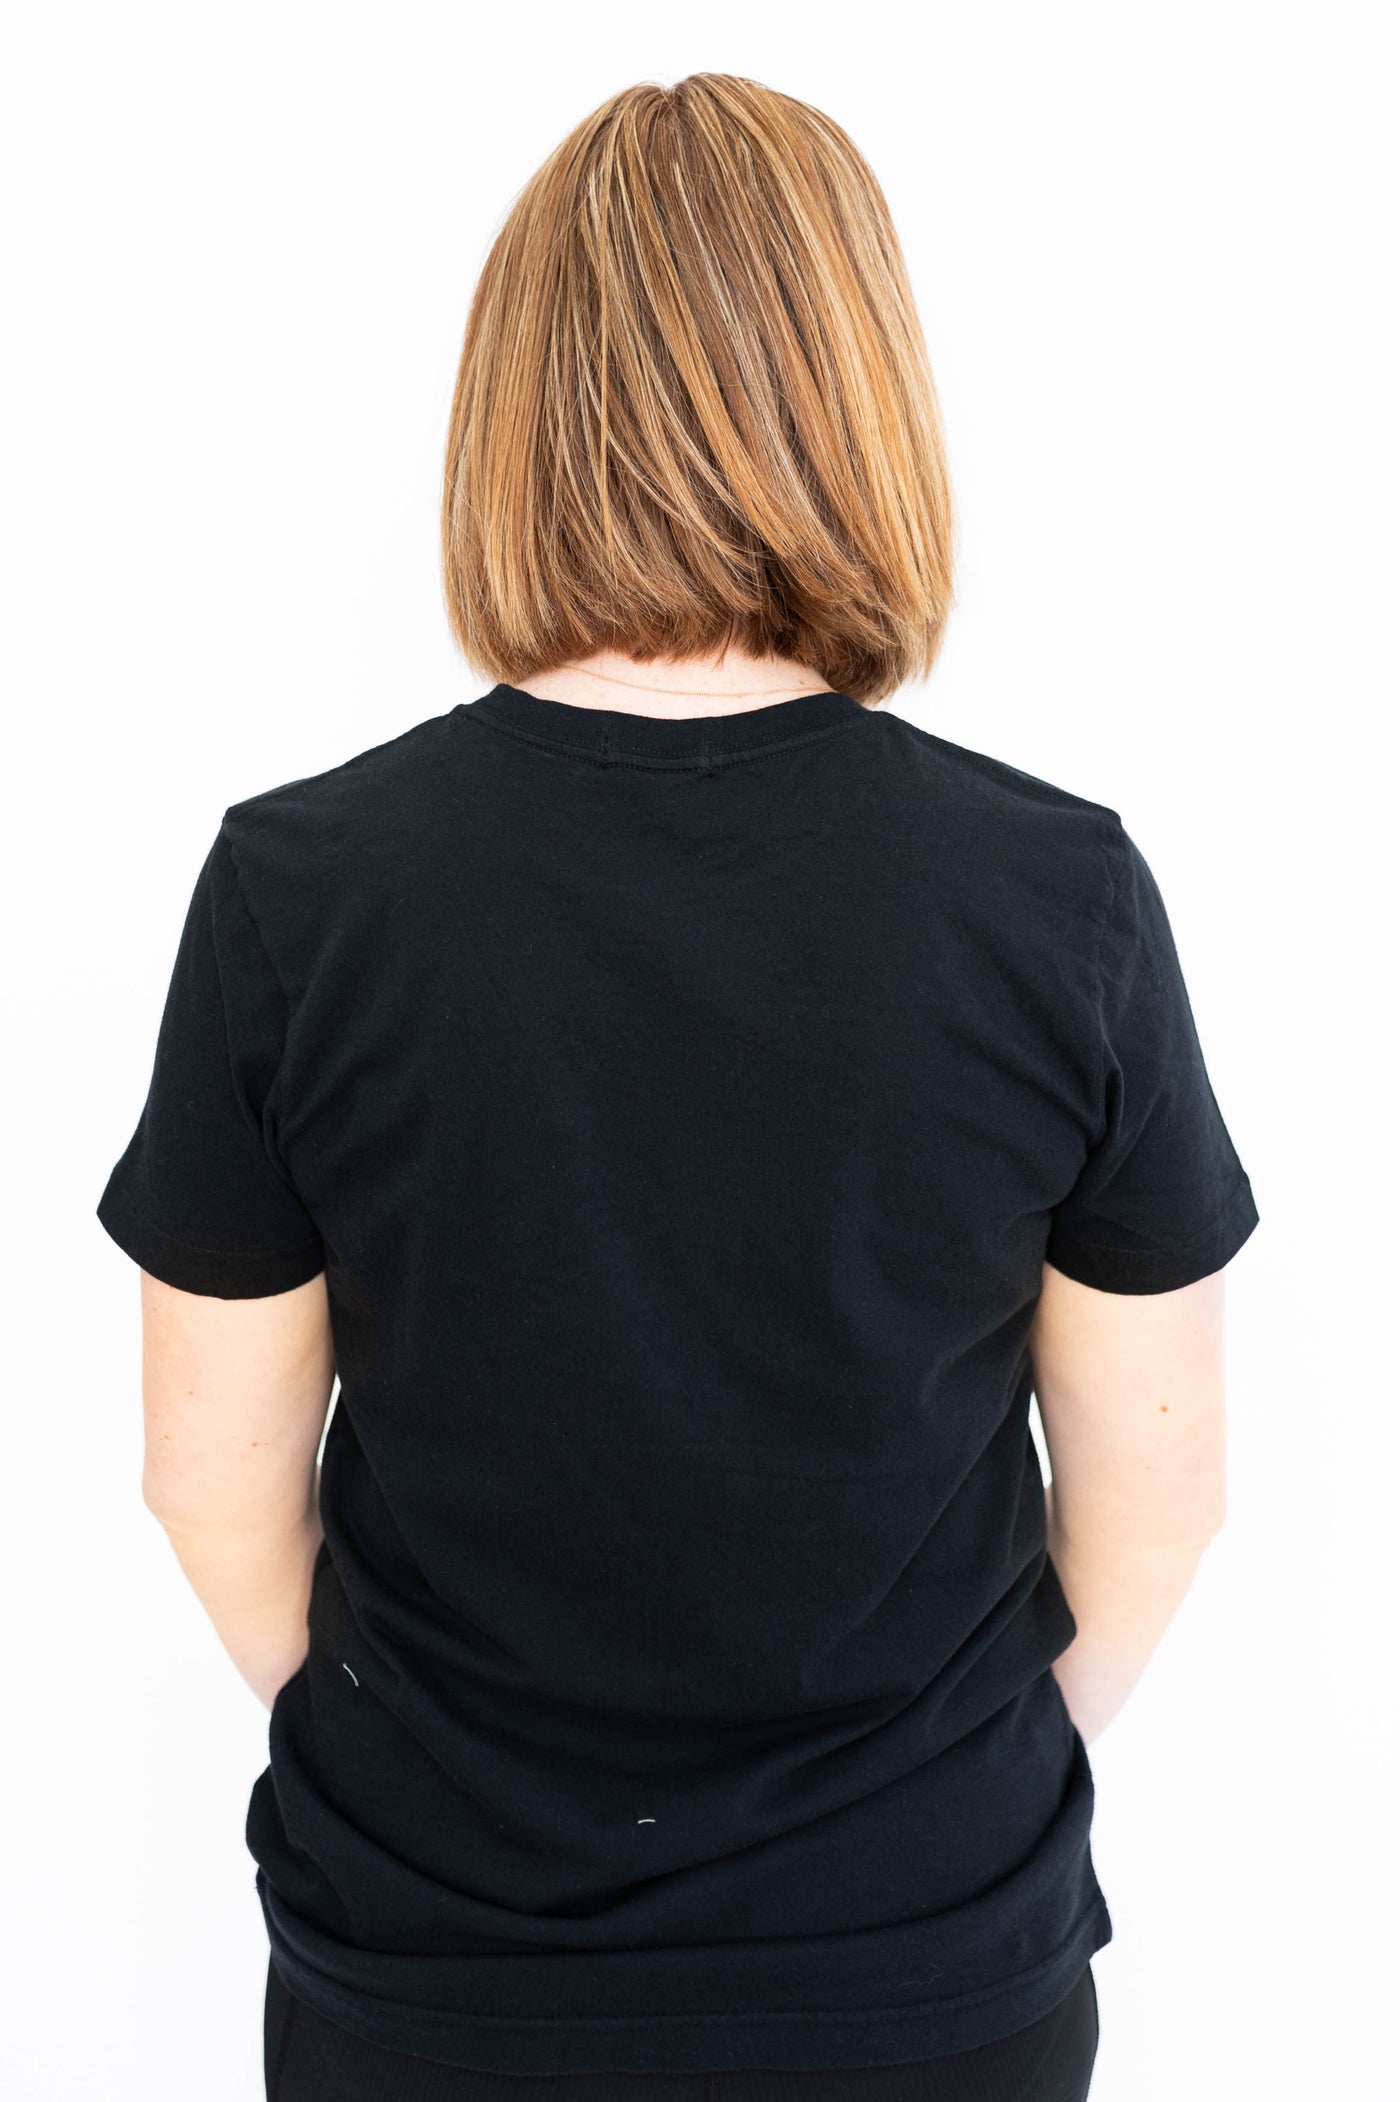 Back view of a cowboy black tee